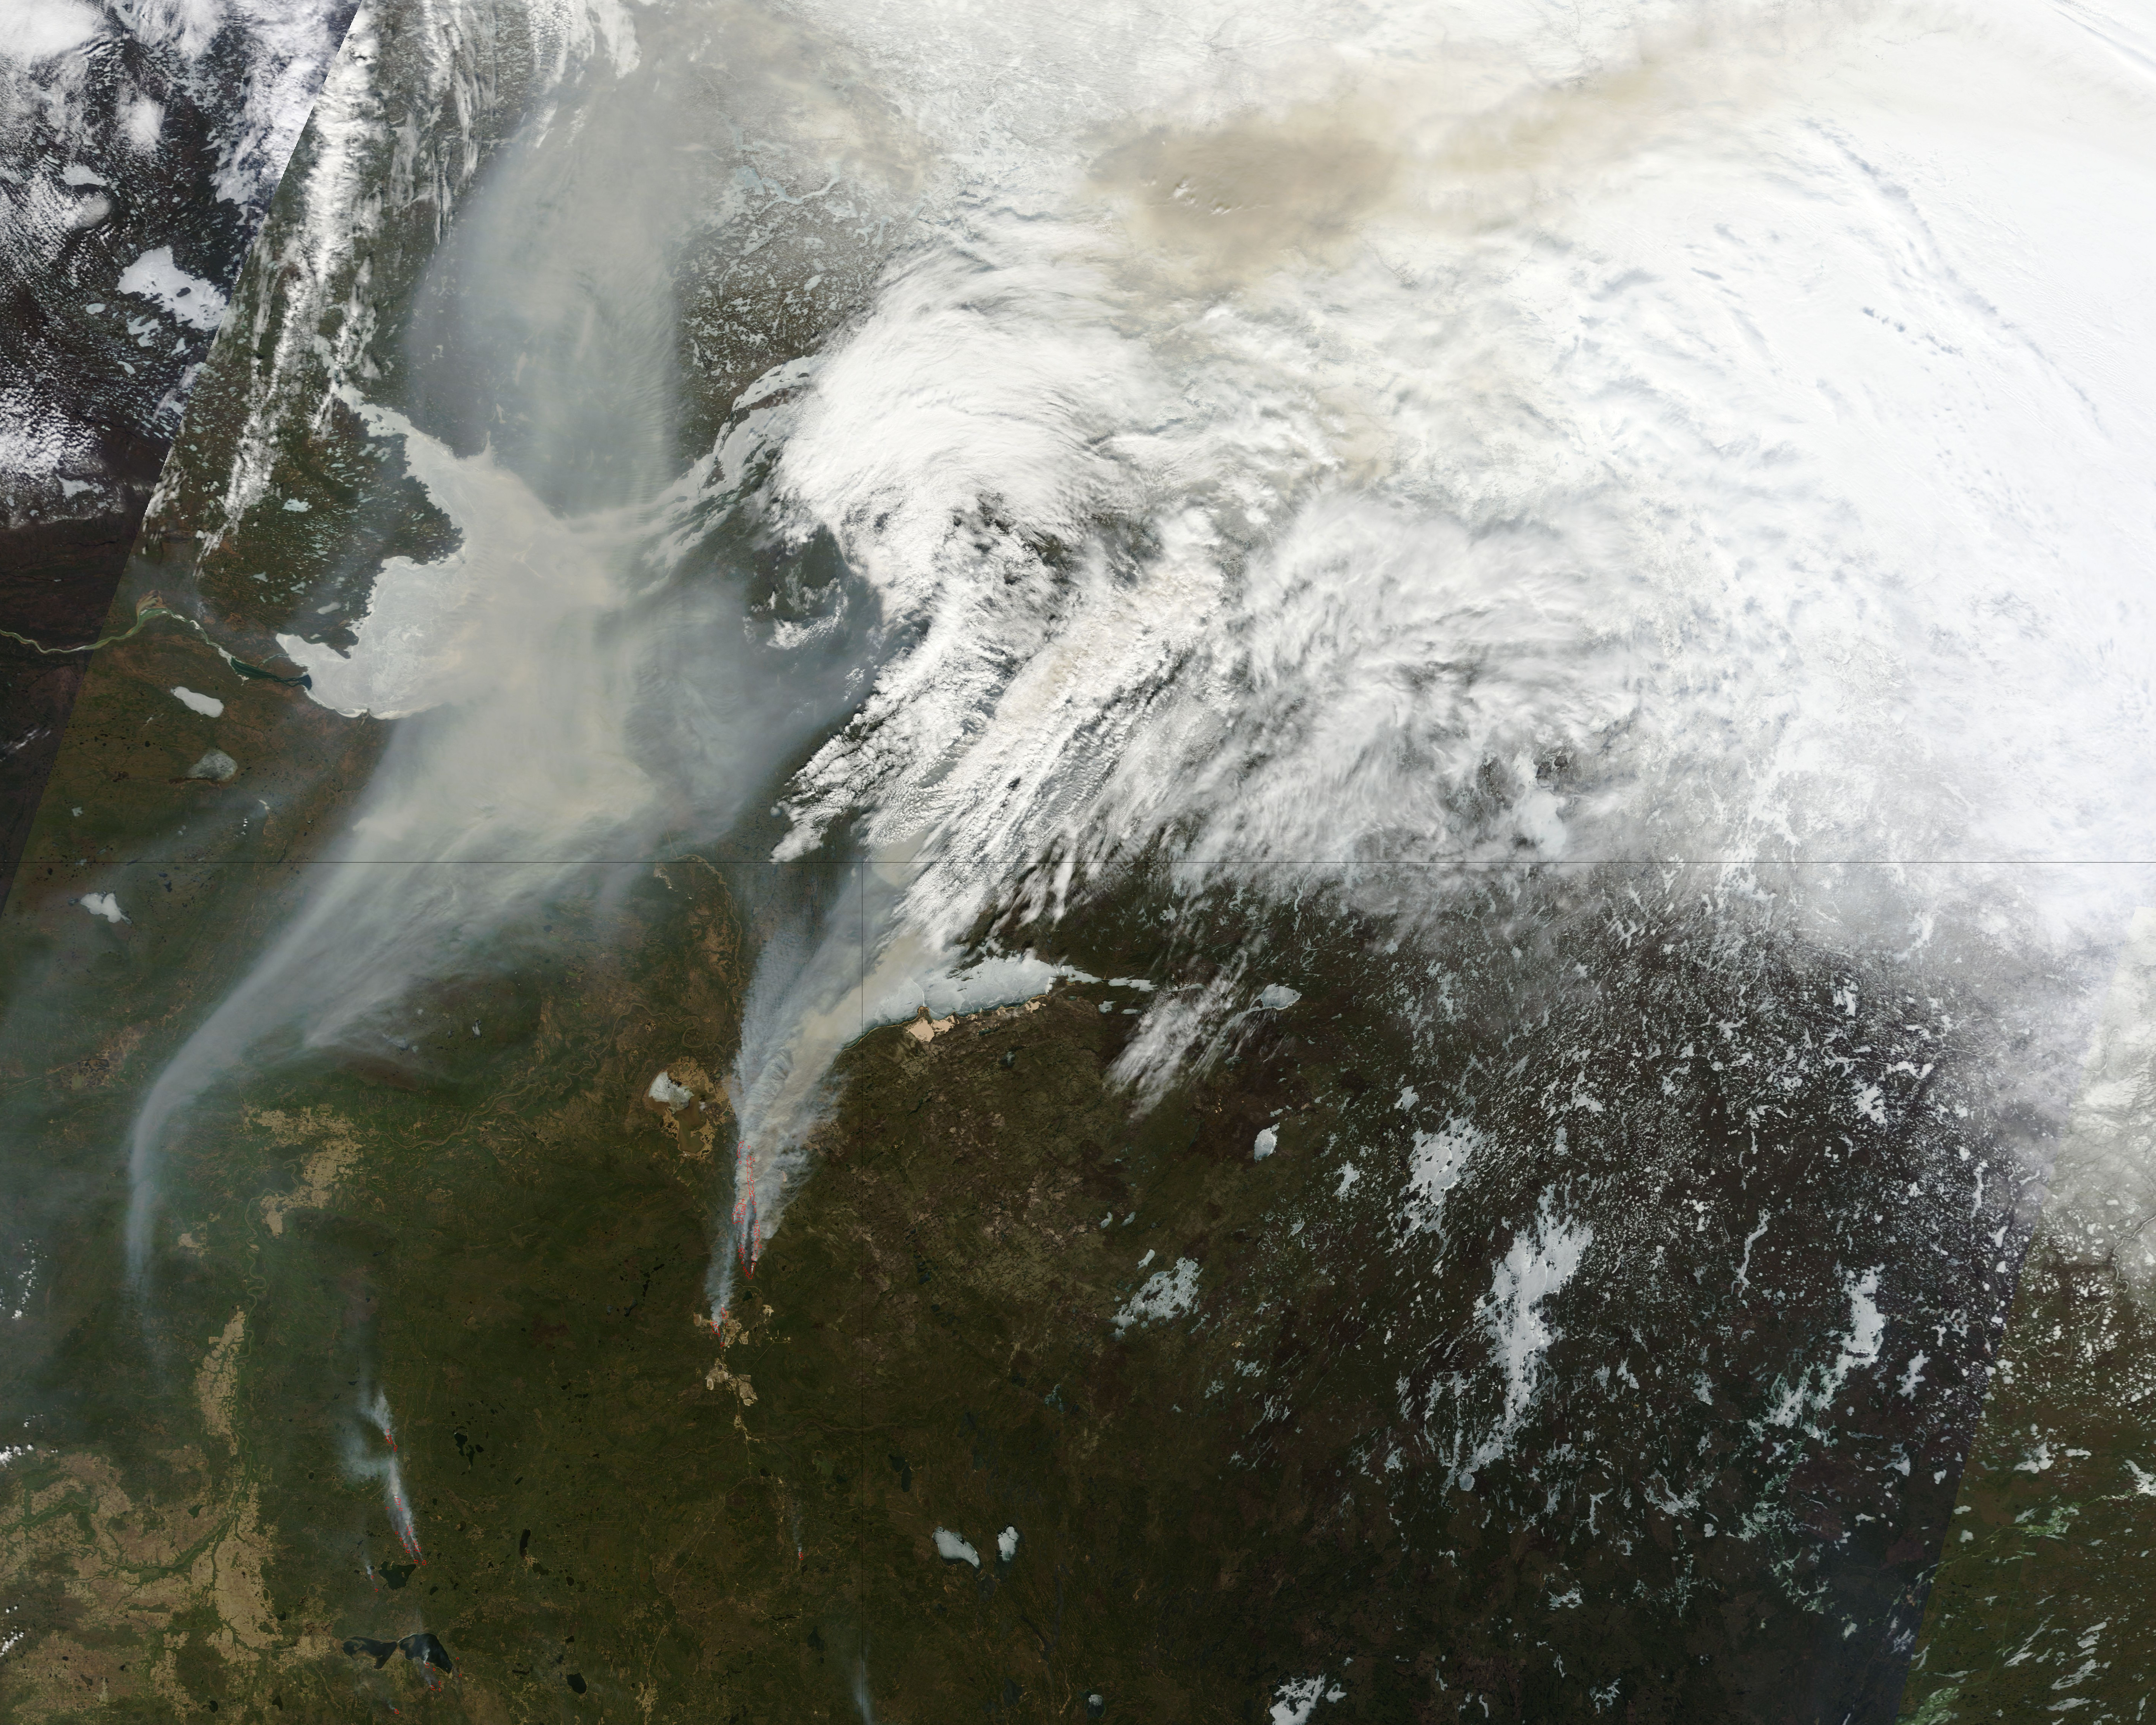 Wildfires in Alberta, Canada - related image preview